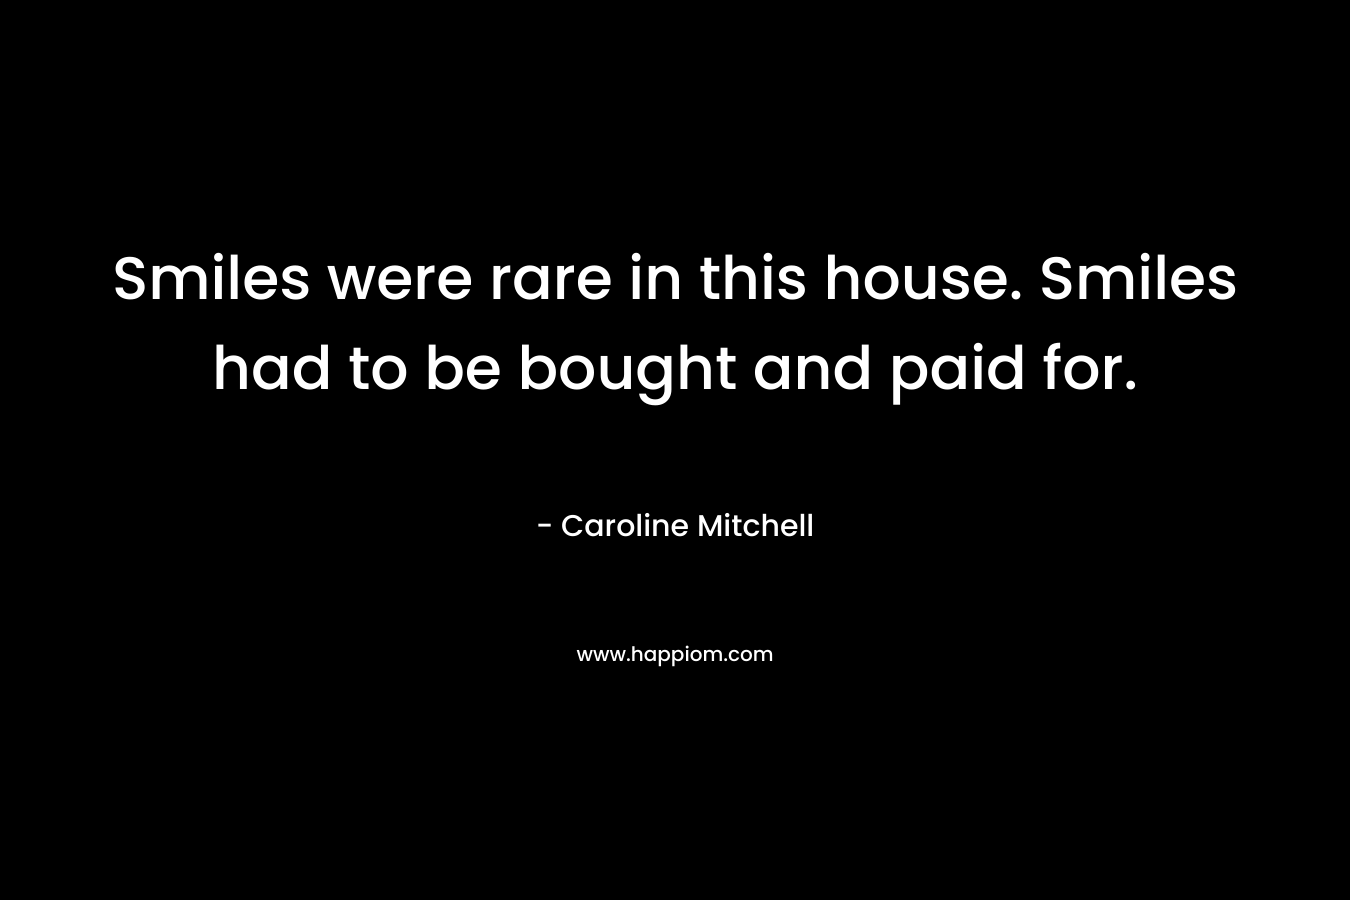 Smiles were rare in this house. Smiles had to be bought and paid for. – Caroline Mitchell